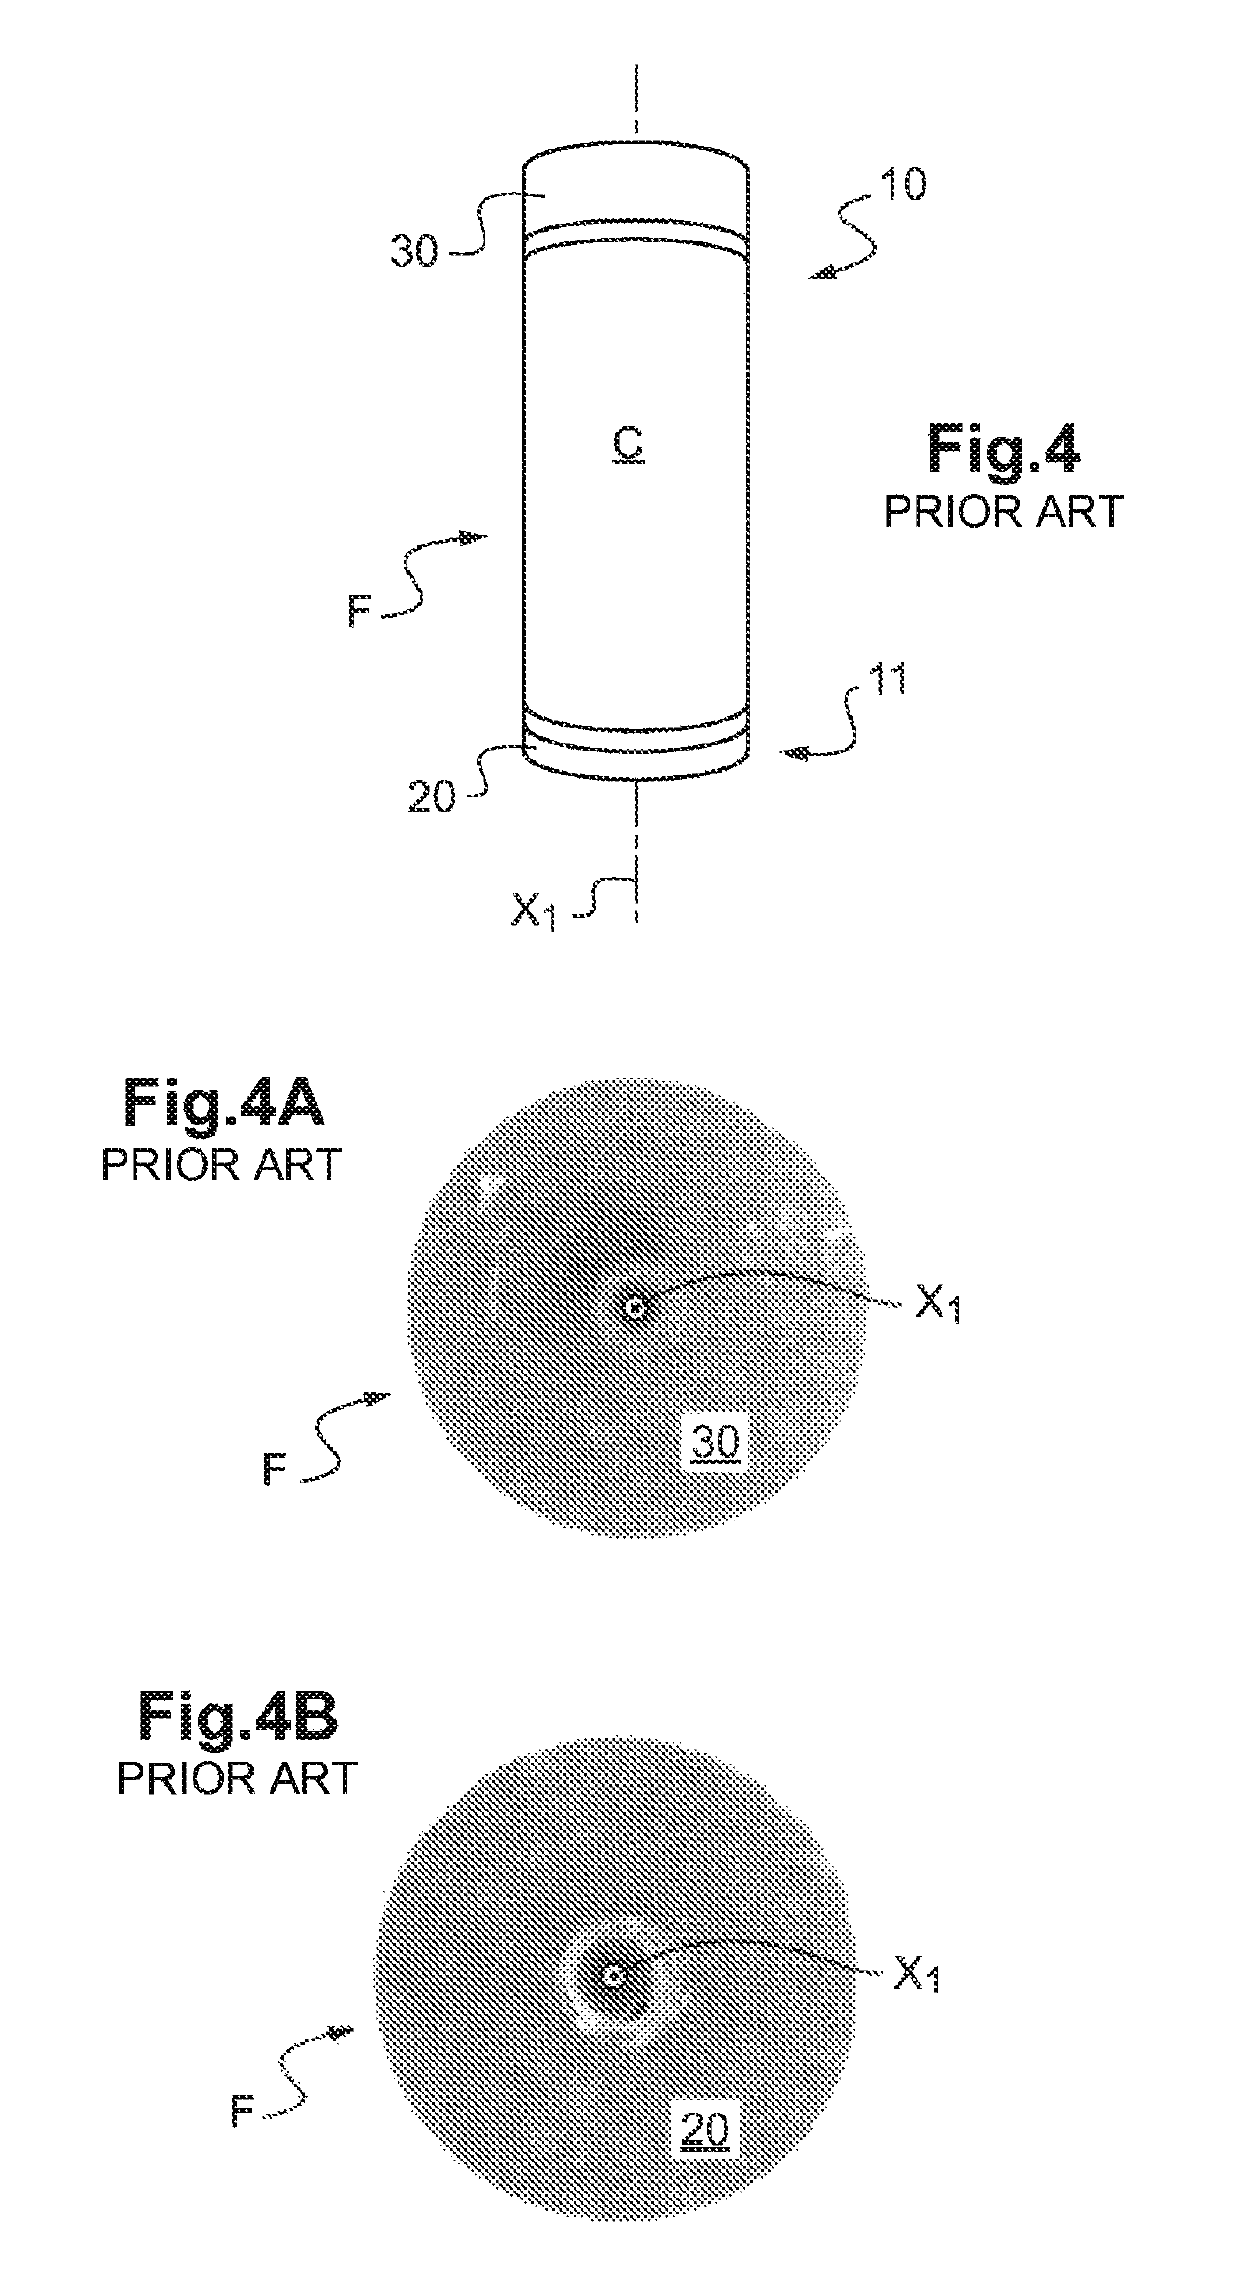 Method for producing an electrochemical bundle for a metal-ion accumulator comprising folding or coiling the foil ends around themselves